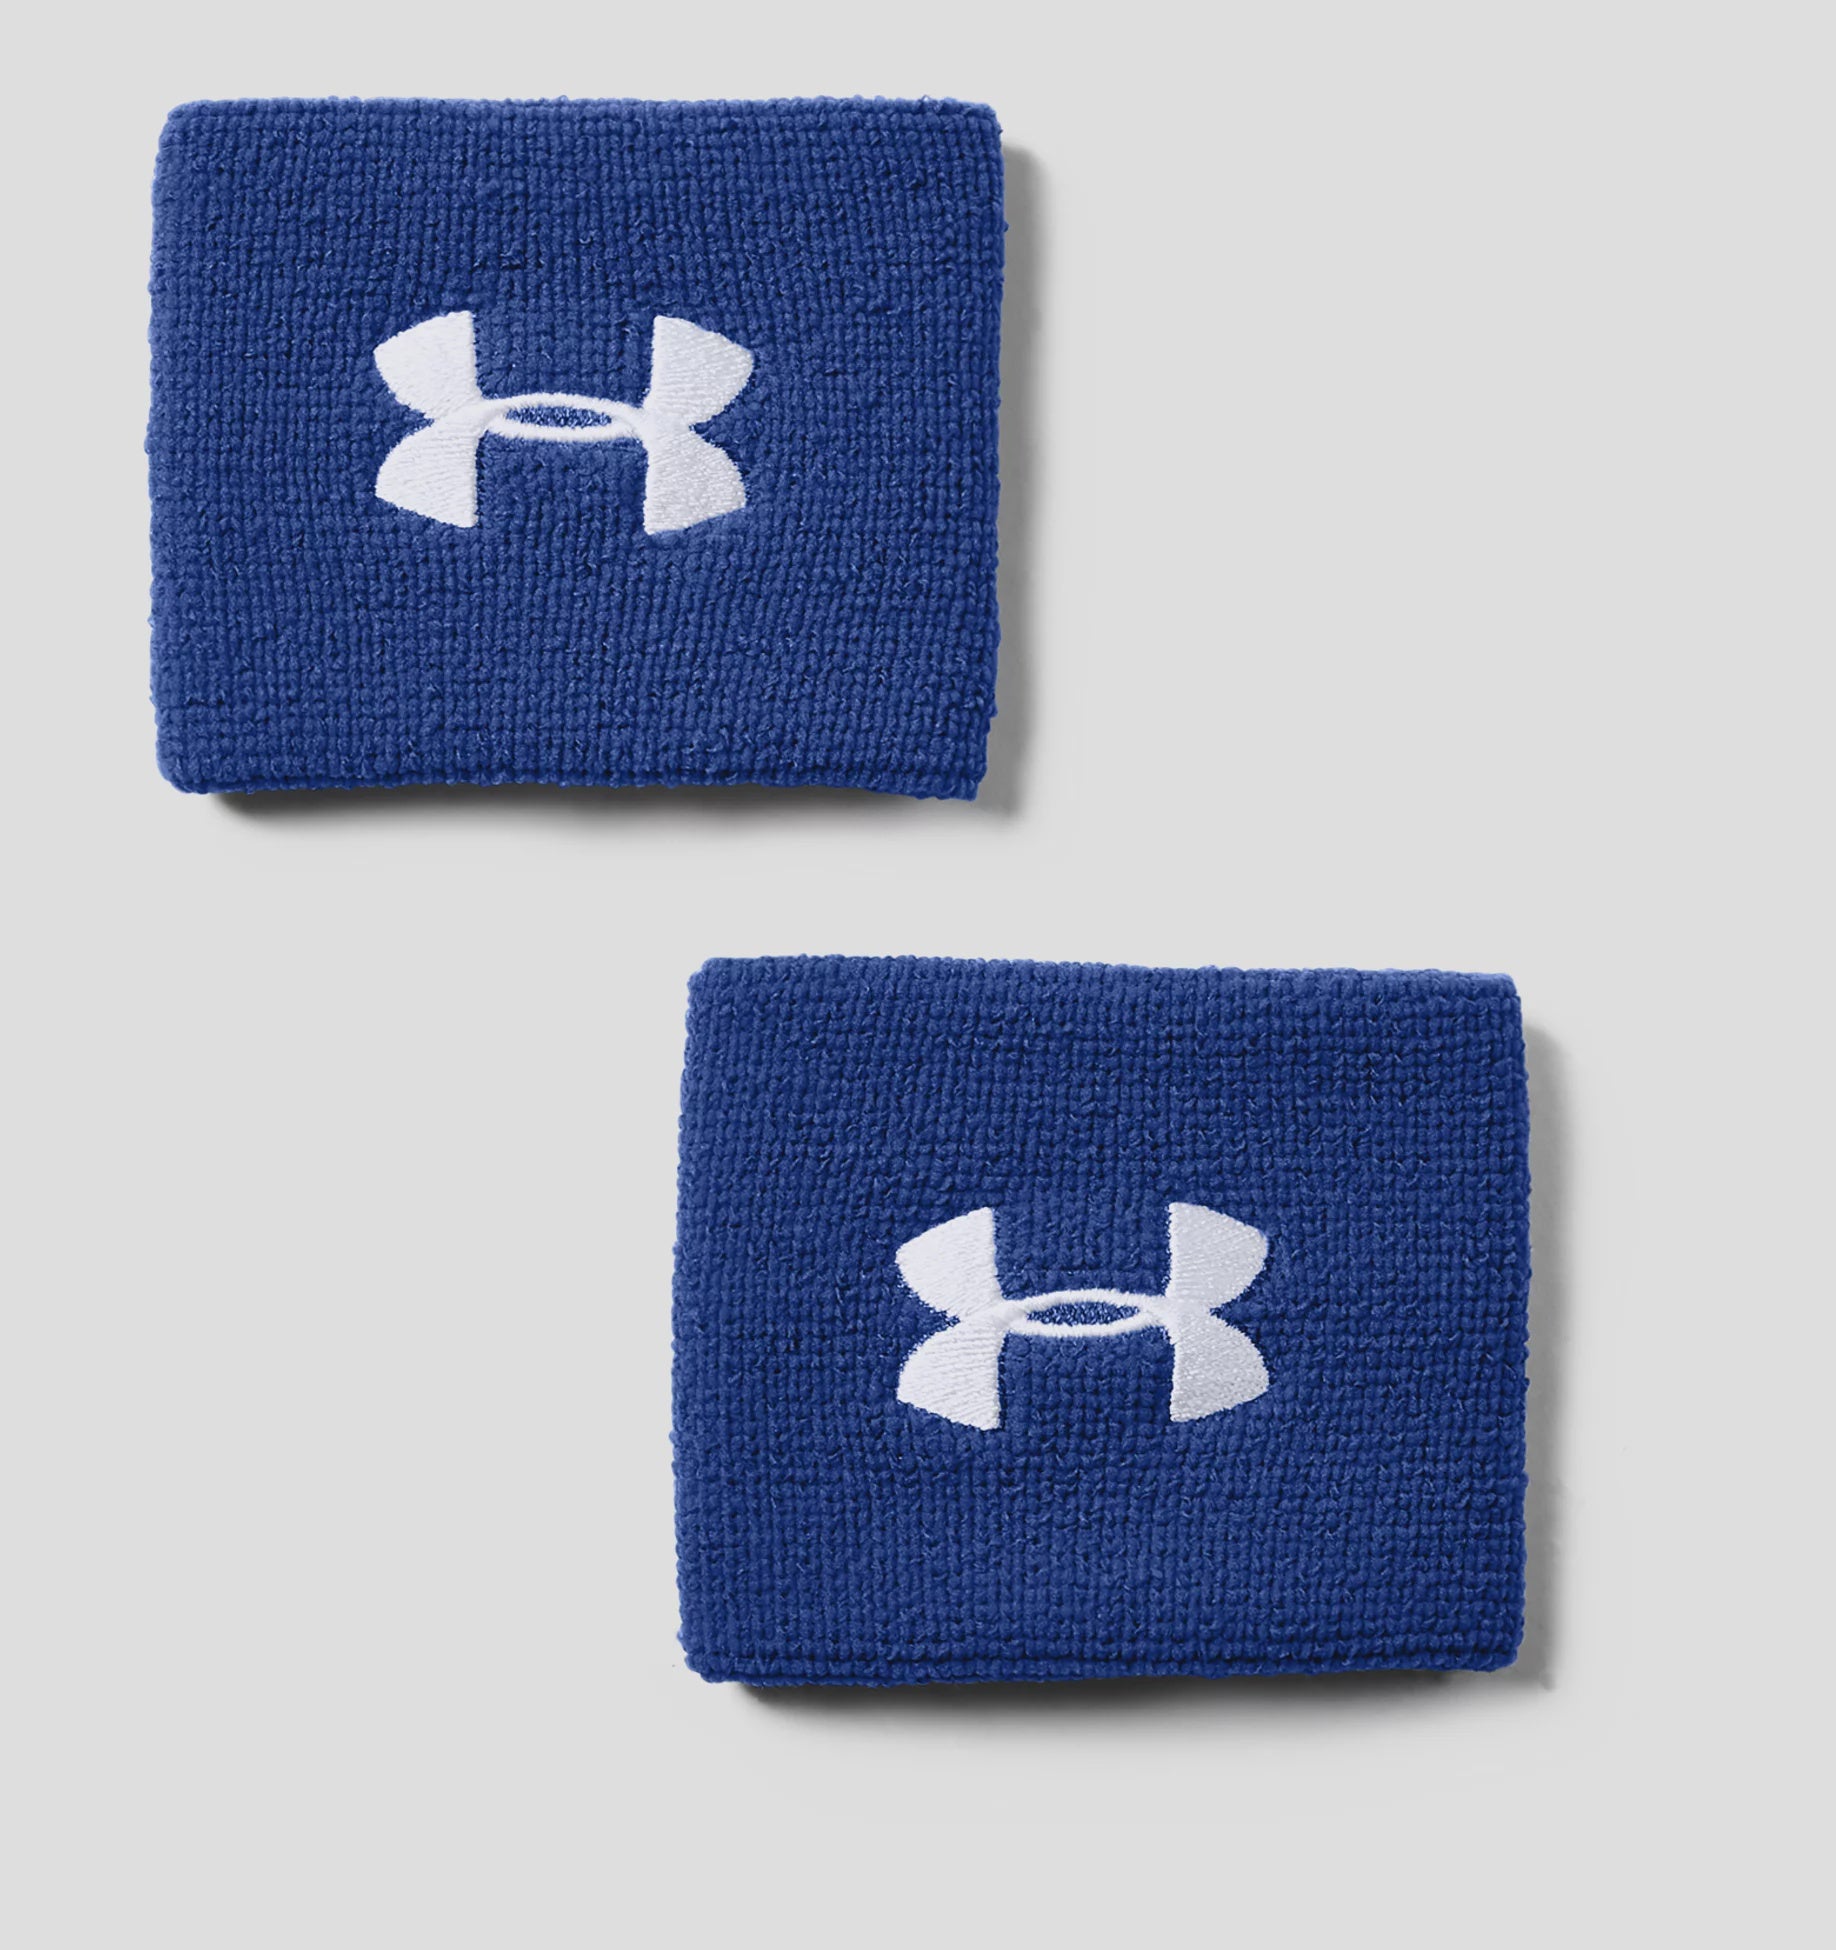 Under Armour 3" Performance Wristband - 2-Pack